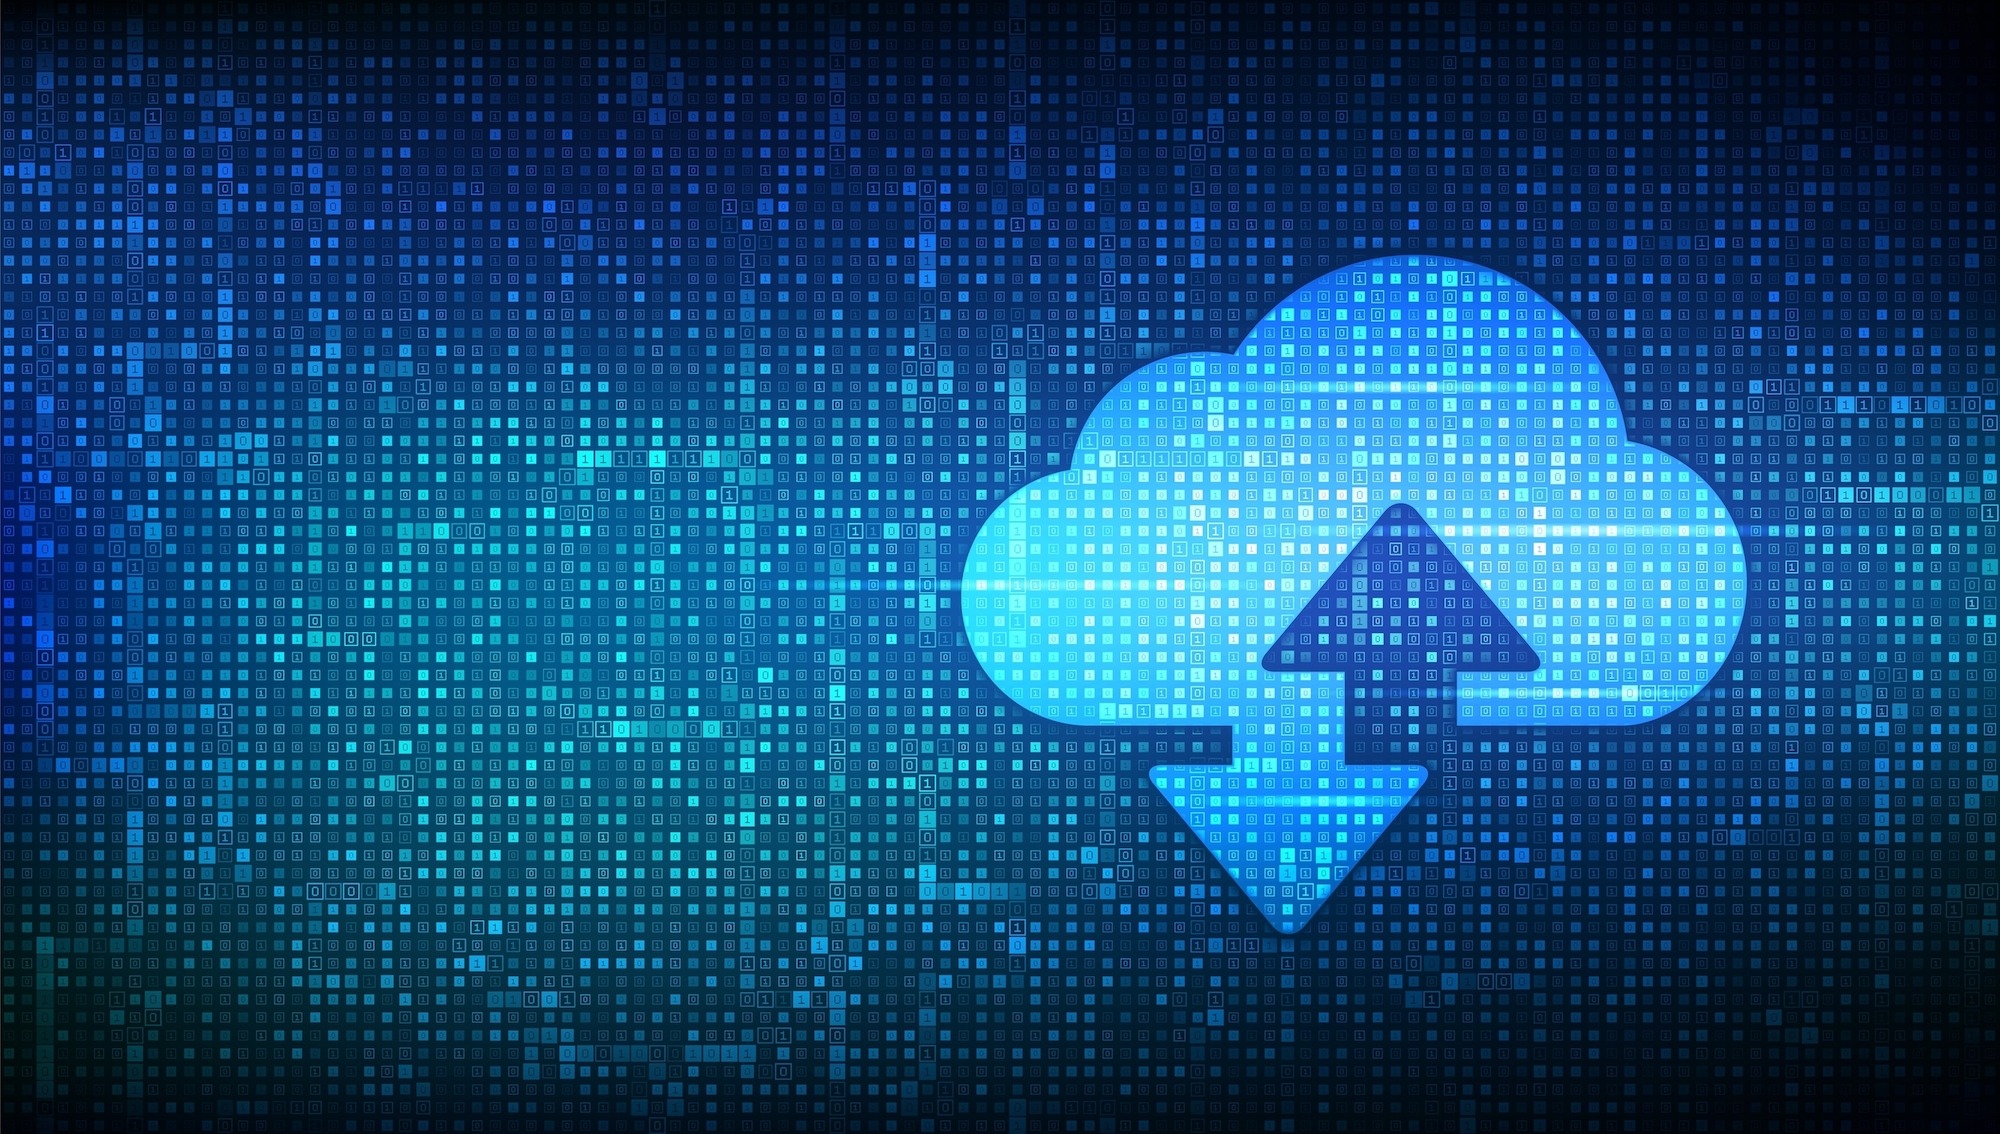 How Can We Make Our Cloud Storage Files Easier to Find